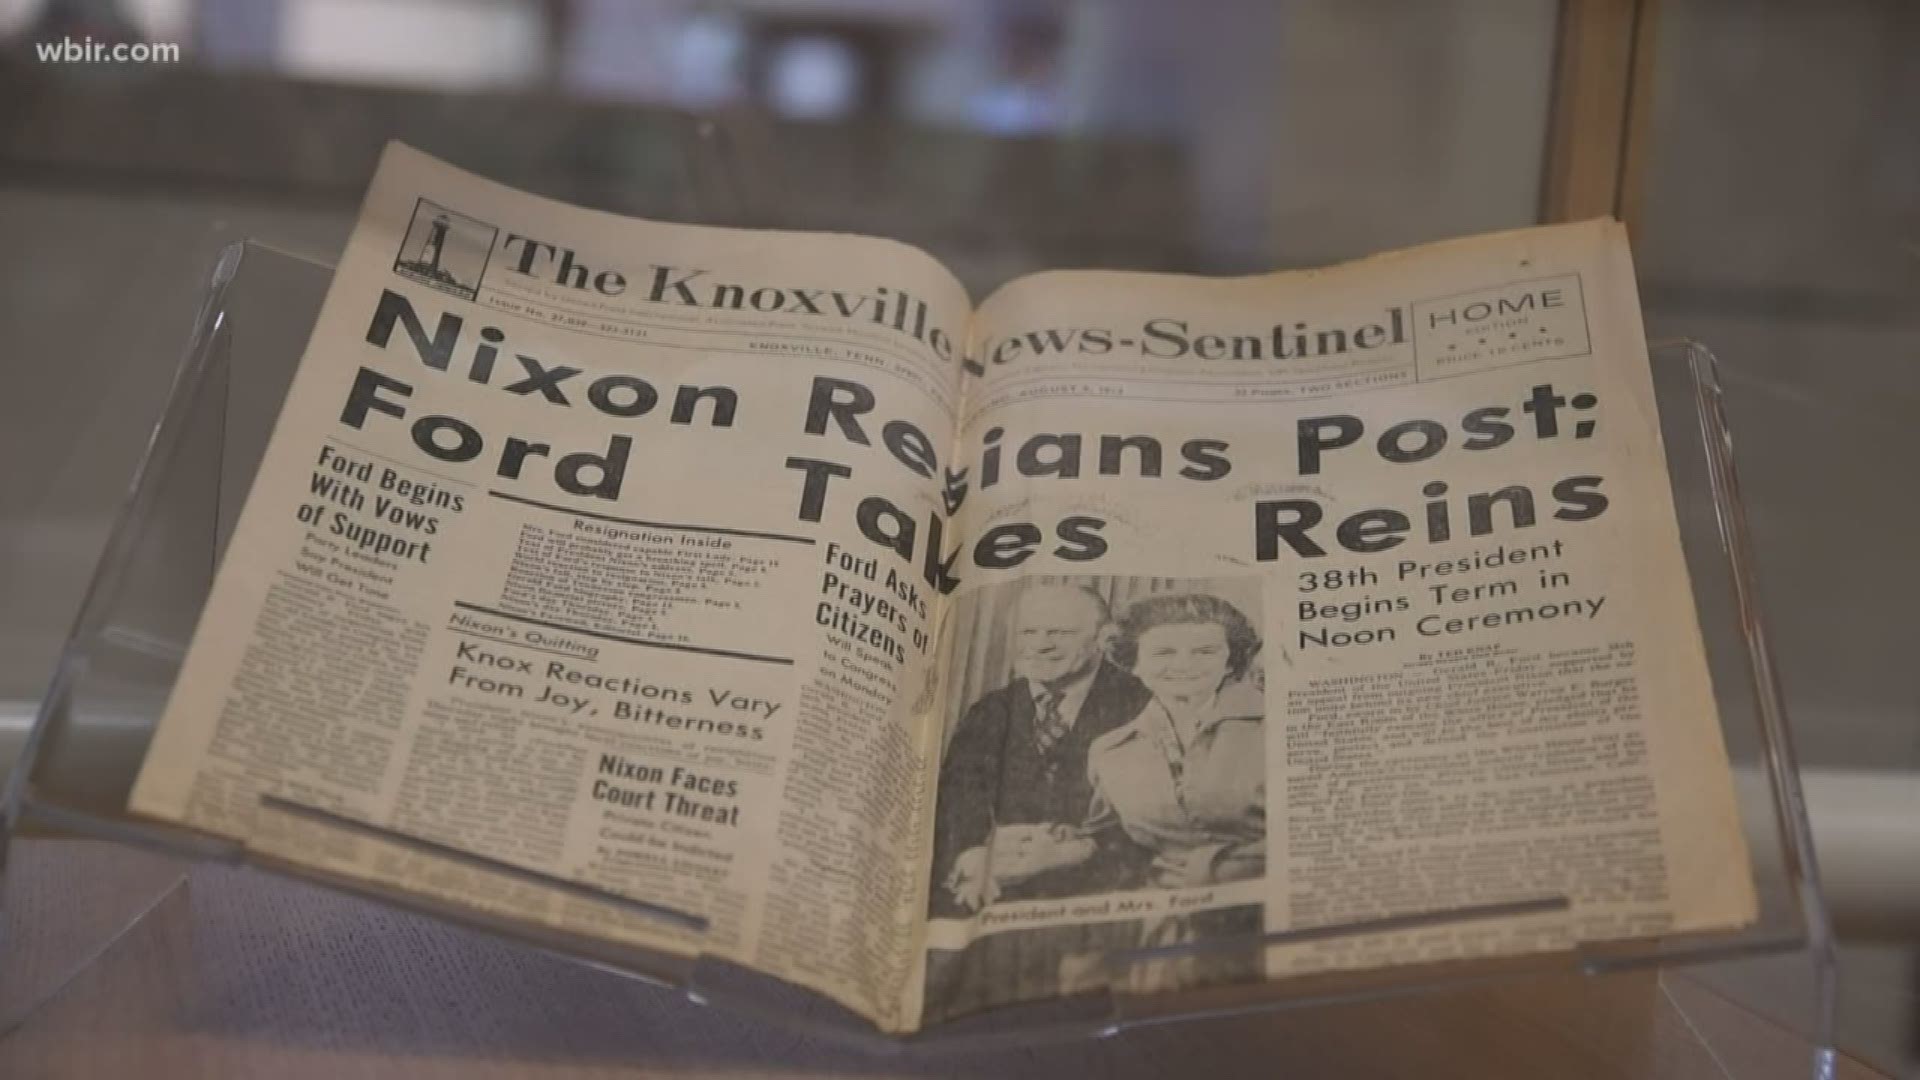 An exhibit for the UT library captures key moments from the Watergate era, sharing what was going through the minds of Tennesseans and Americans.